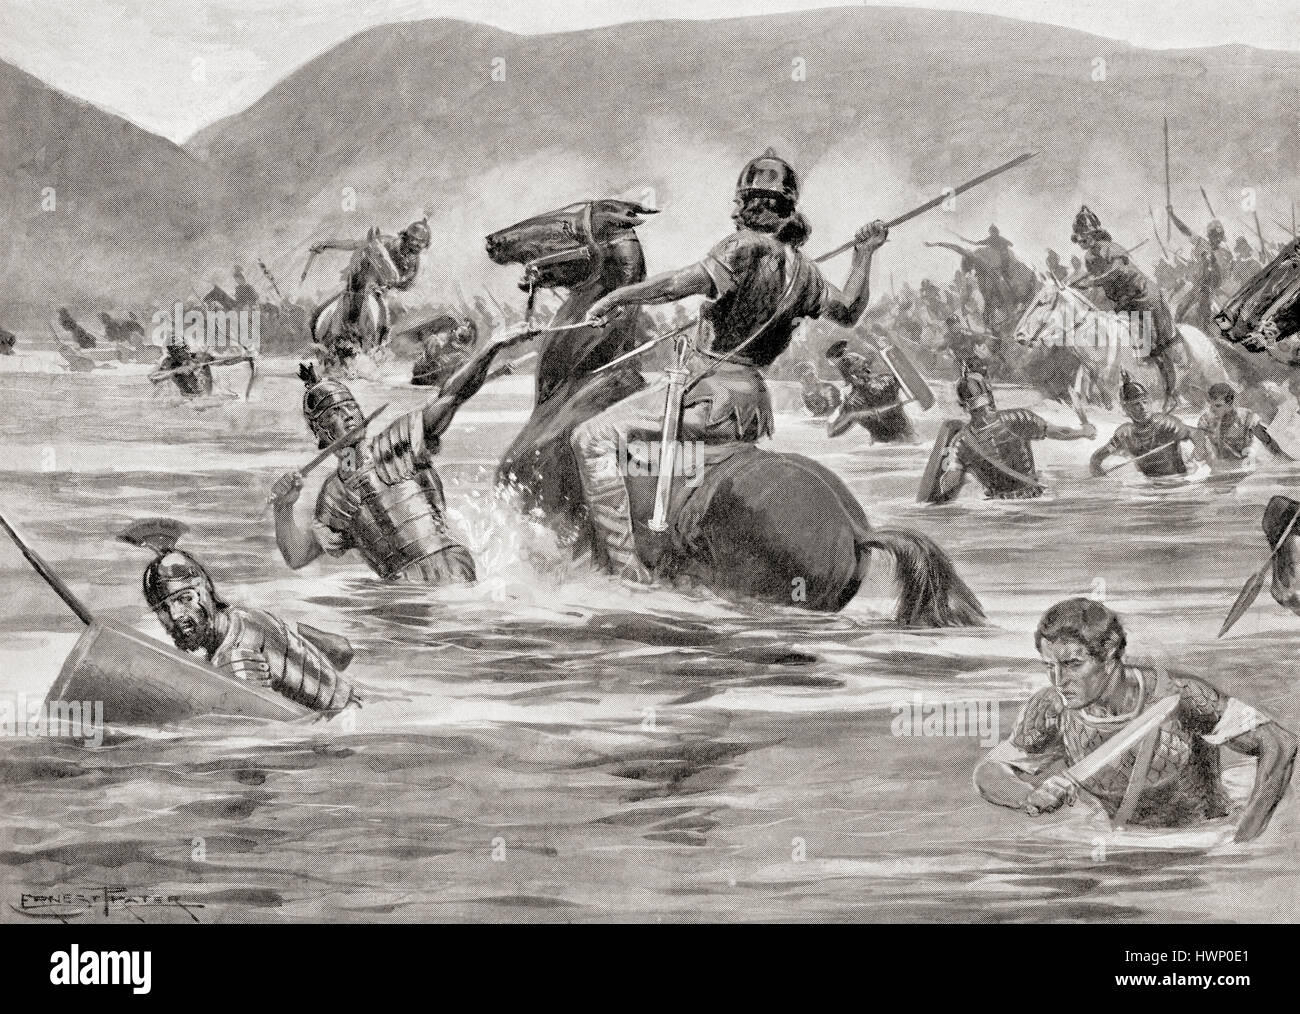 The Battle of Lake Trasimene, Italy, June 24, 217 BC, between the Carthaginians under Hannibal and the Romans.  After the painting by Ernest Prater, (1864-1950).  From Hutchinson's History of the Nations, published 1915. Stock Photo